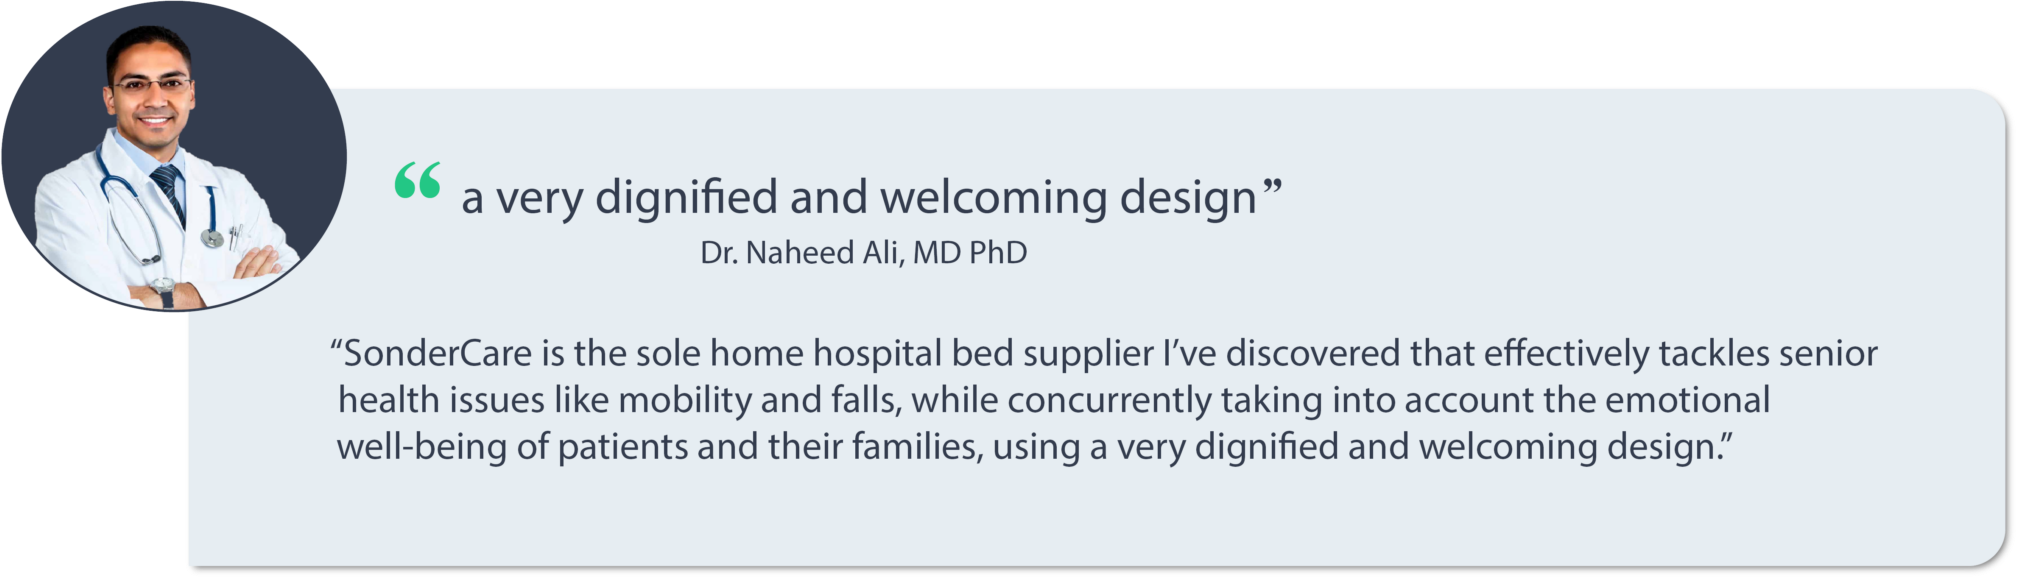 A doctor in a lab coat provides a positive testimonial about a single product from a hospital bed supplier.